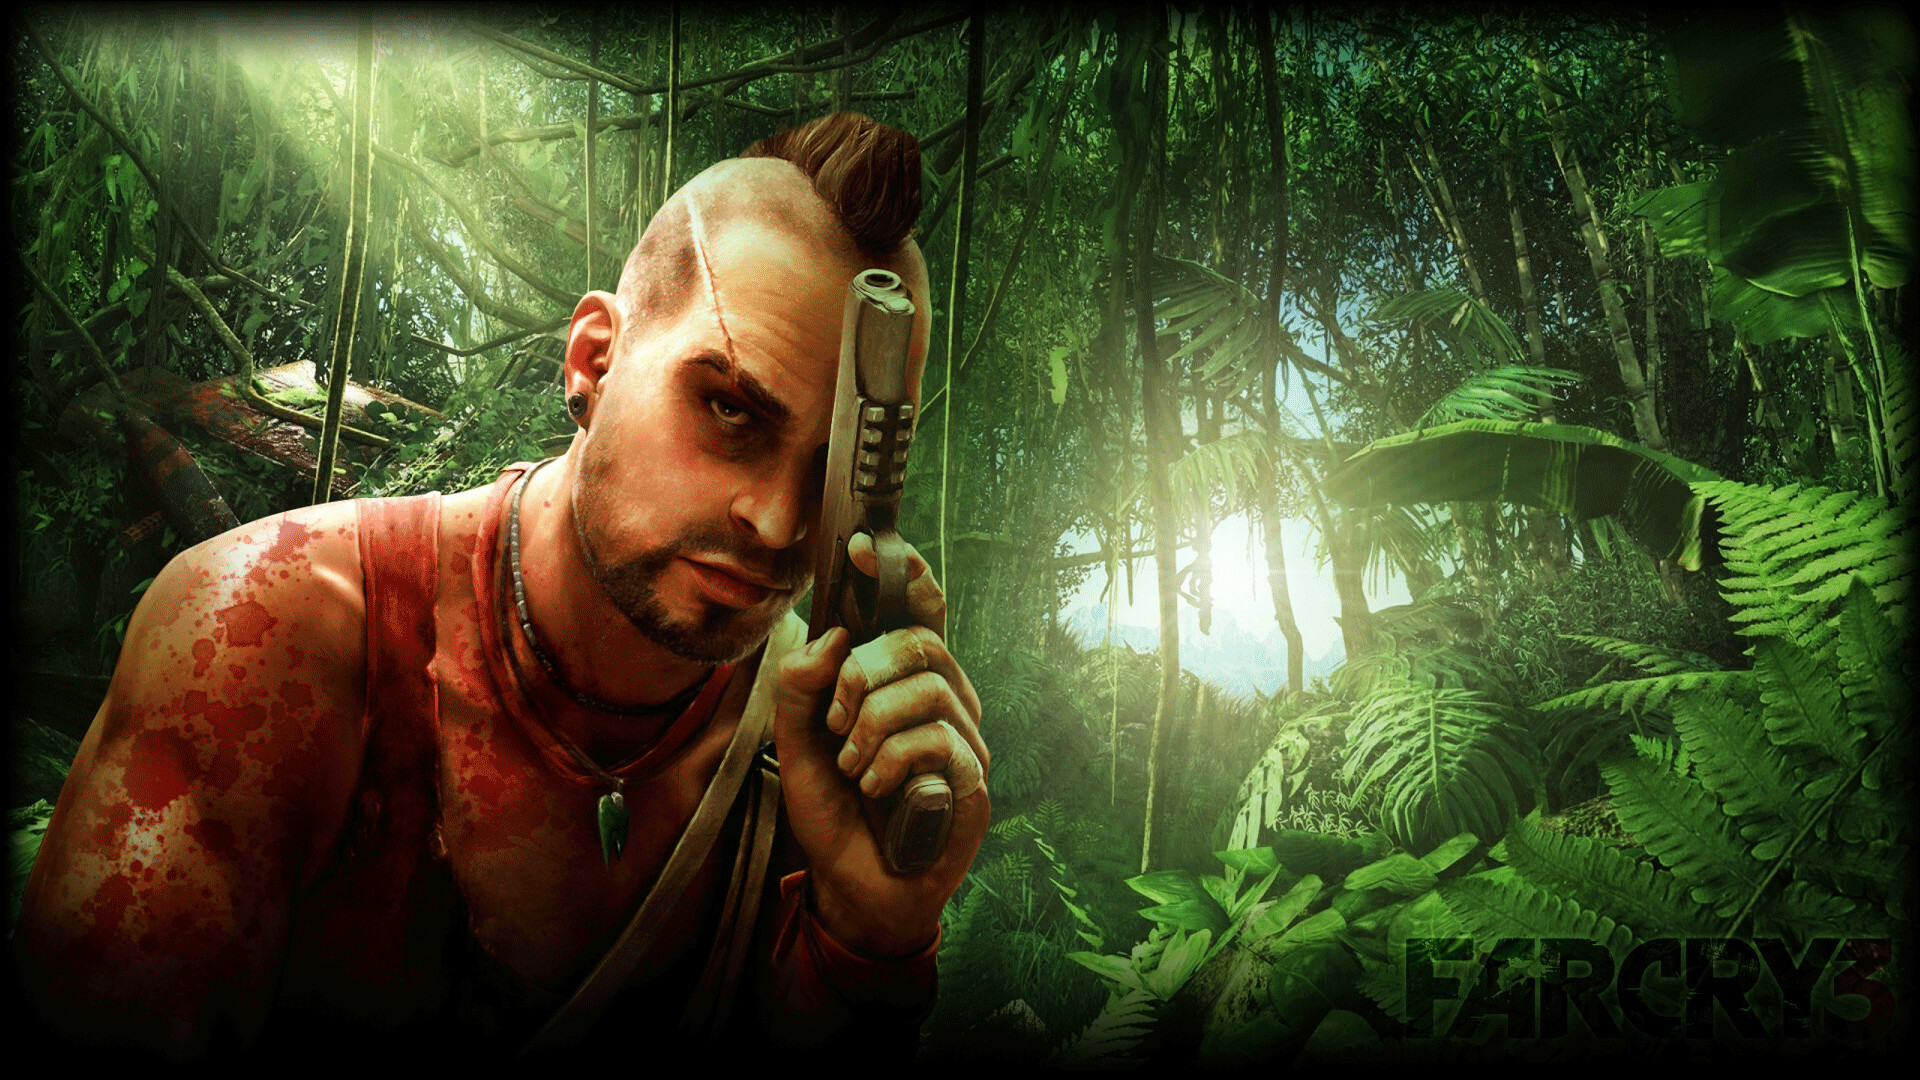 Far Cry 3: Vaas Montenegro, A character from Ubisoft's video game franchise. 1920x1080 Full HD Wallpaper.